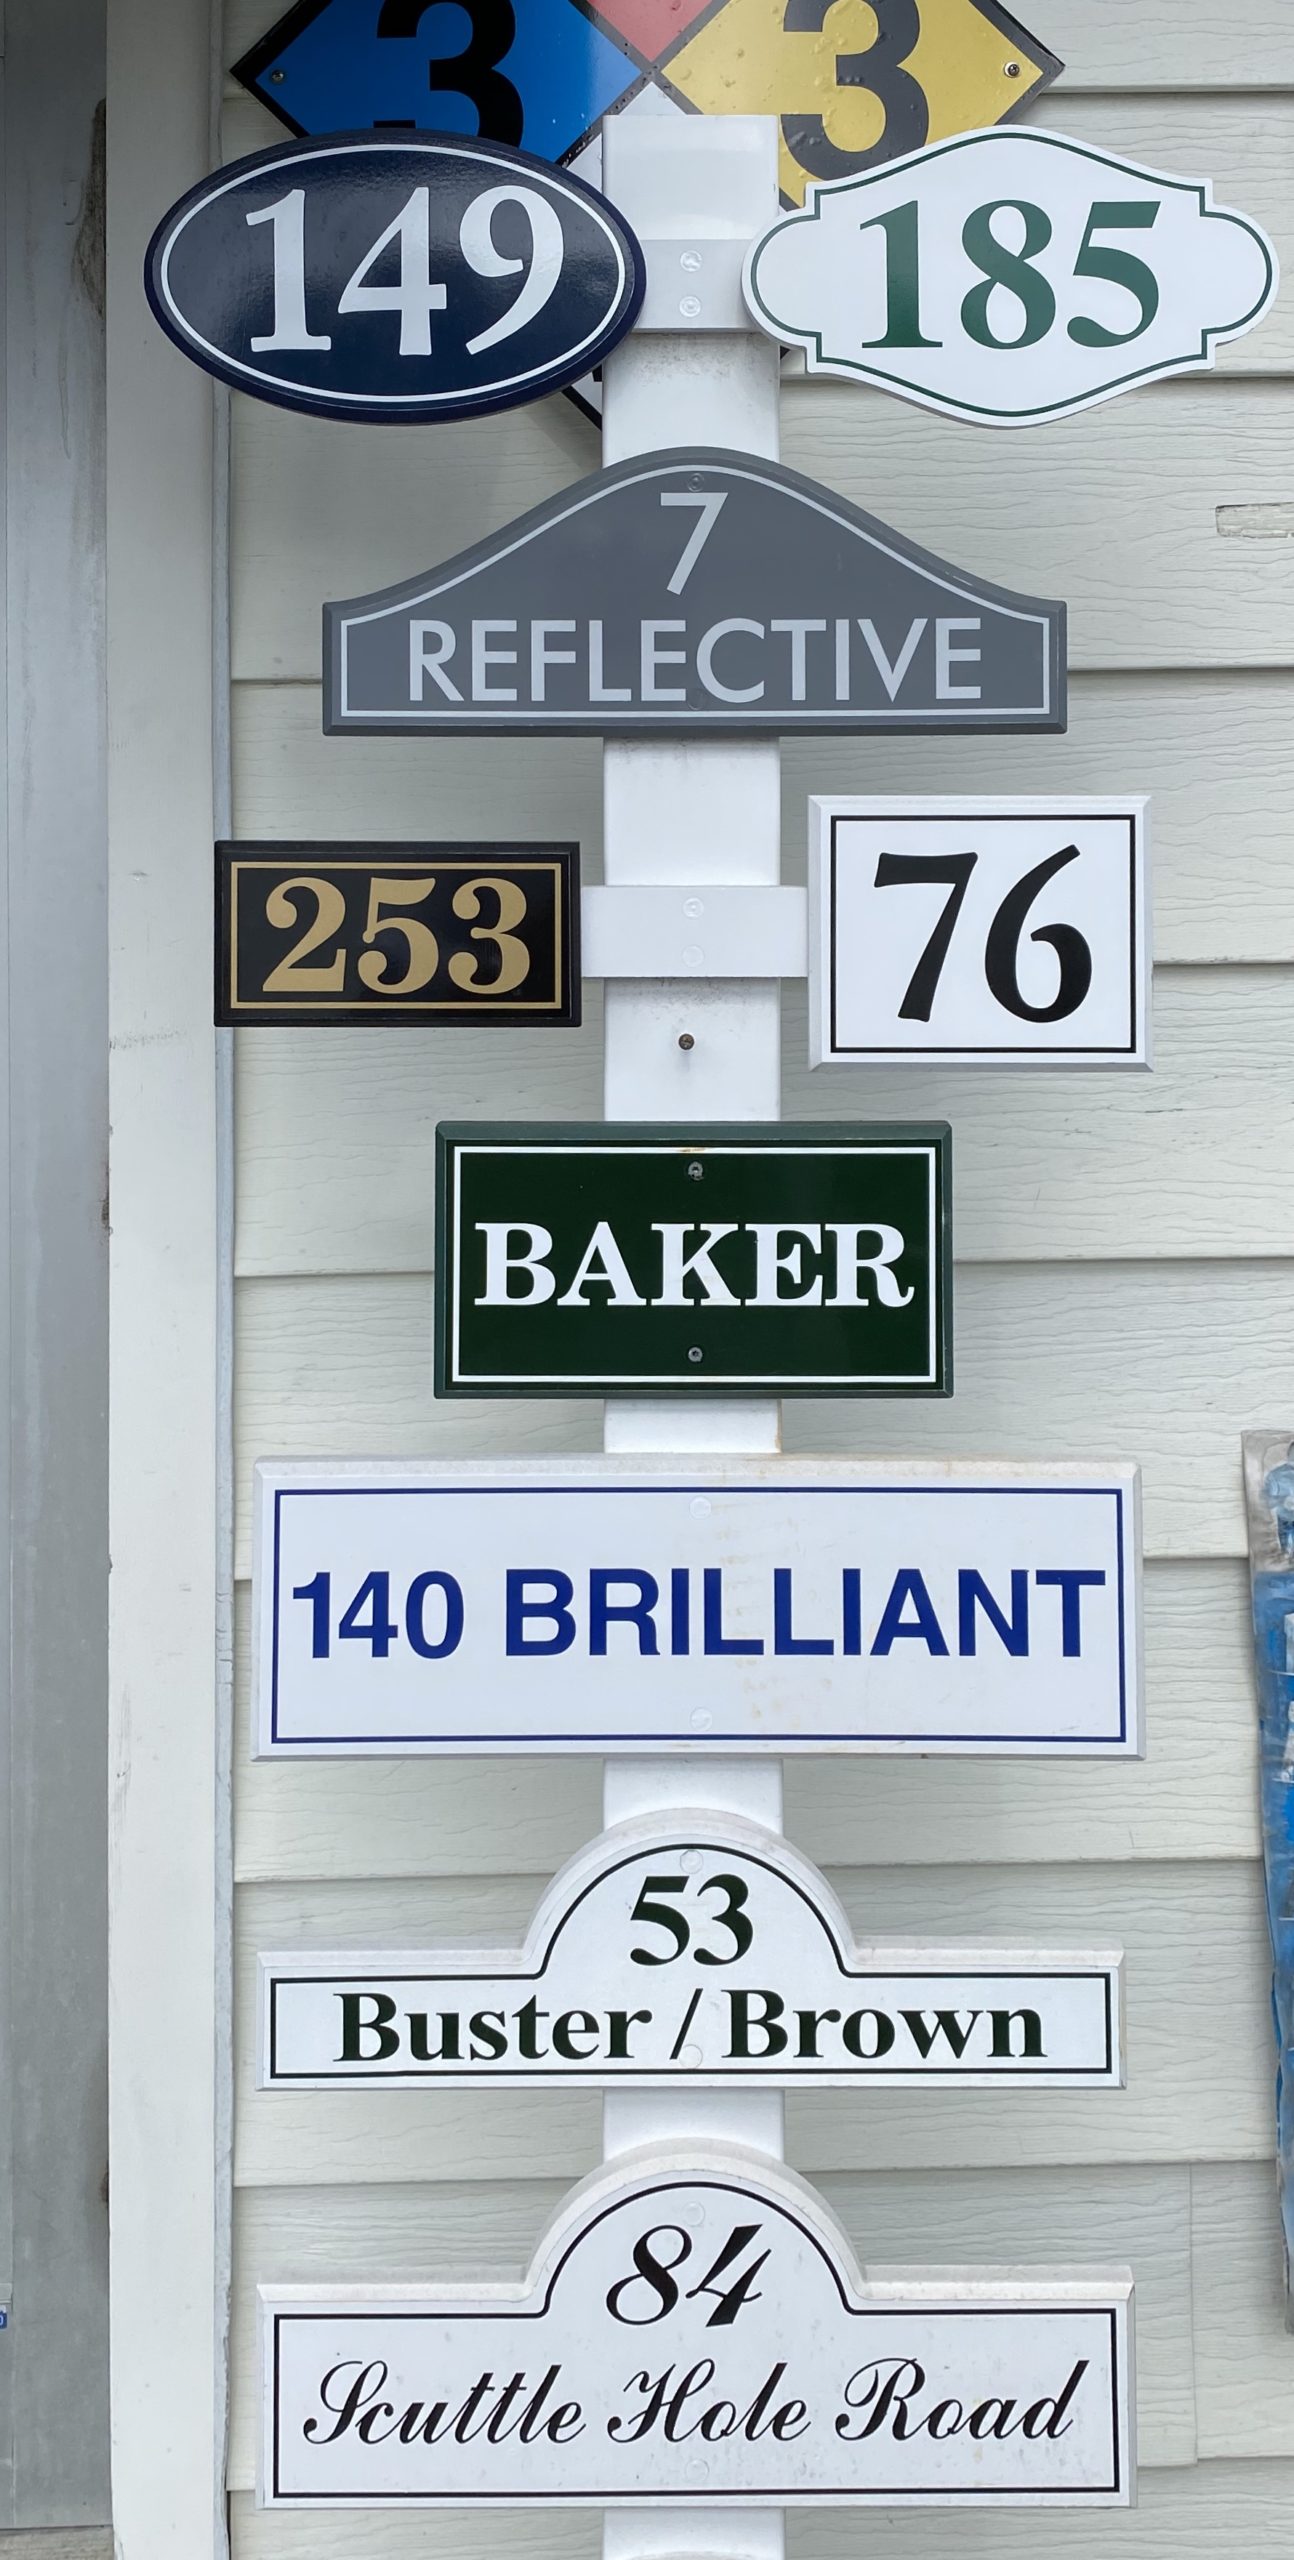 Display of sign styles available at Herrick Hardware on Main Street in Southampton Village.